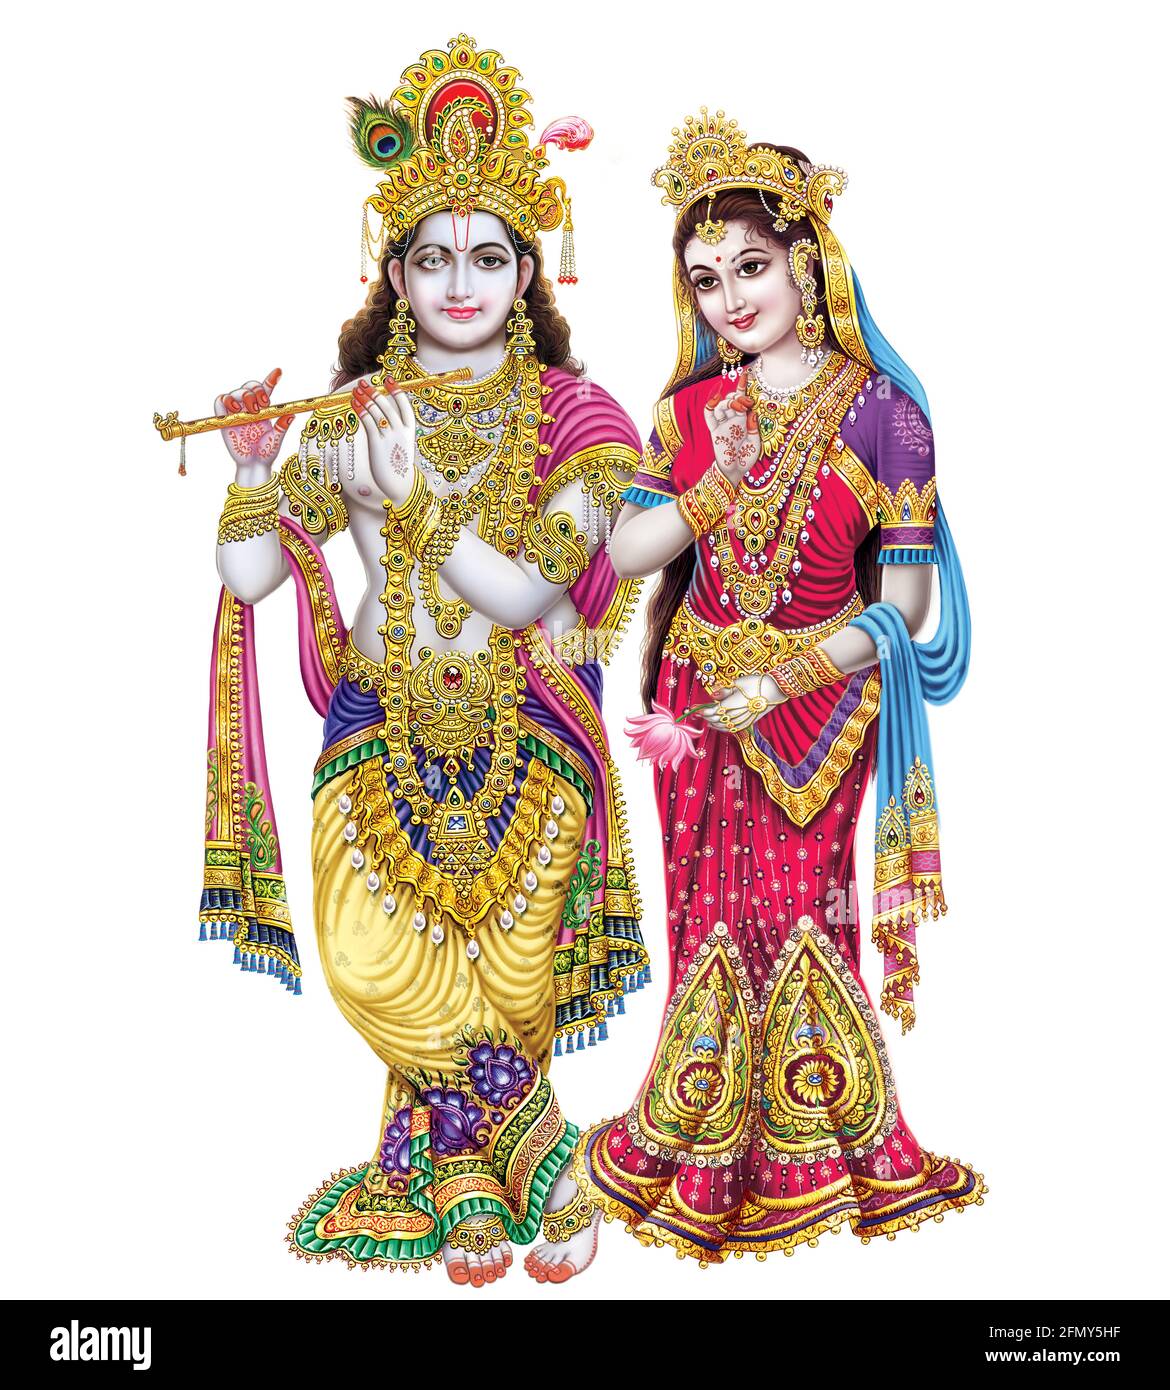 Radha krishna Cut Out Stock Images & Pictures - Alamy